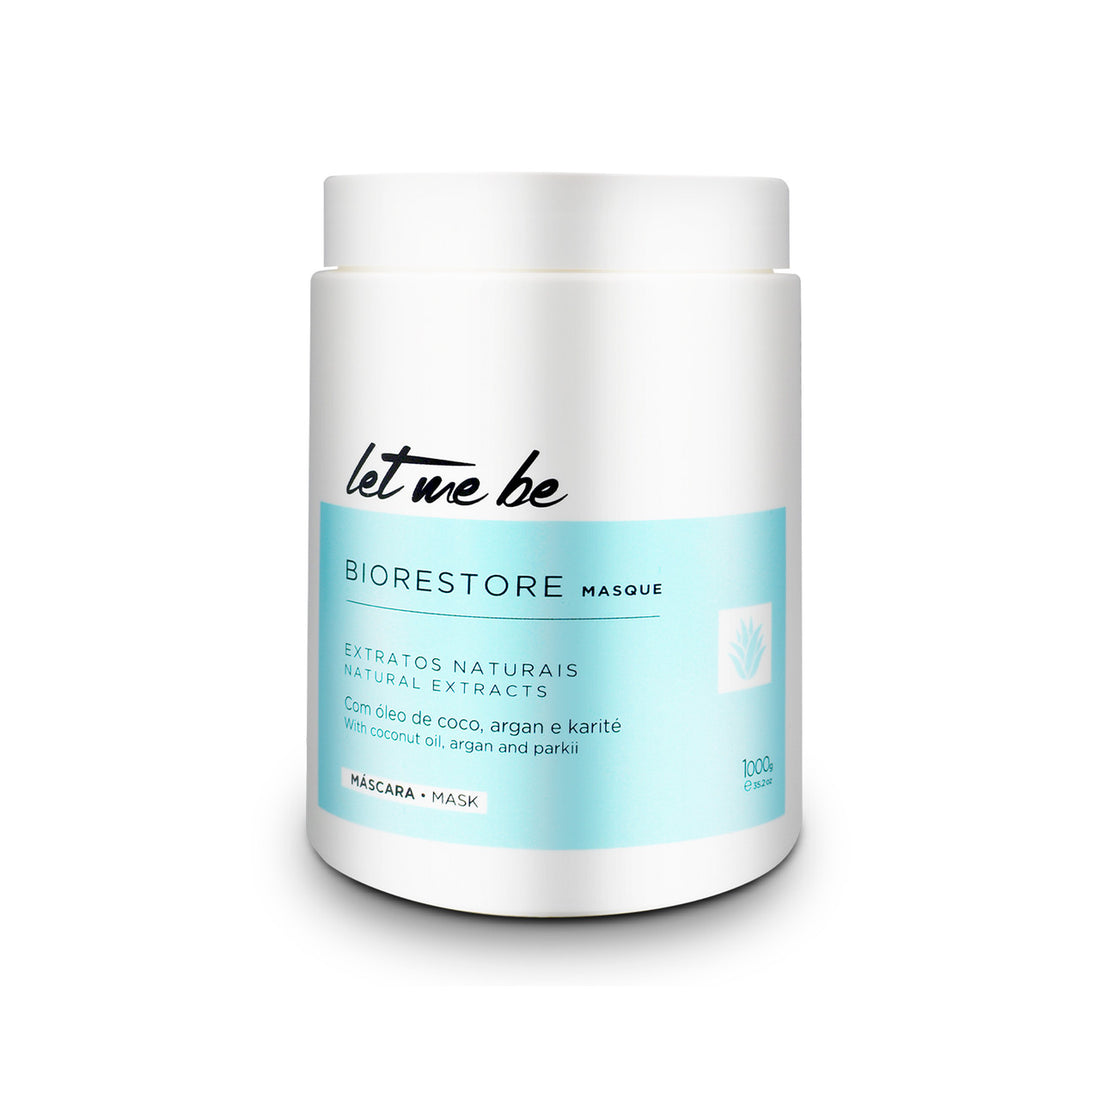 Let me be, Biorestore, Hair Mask For Hair, 1Kg